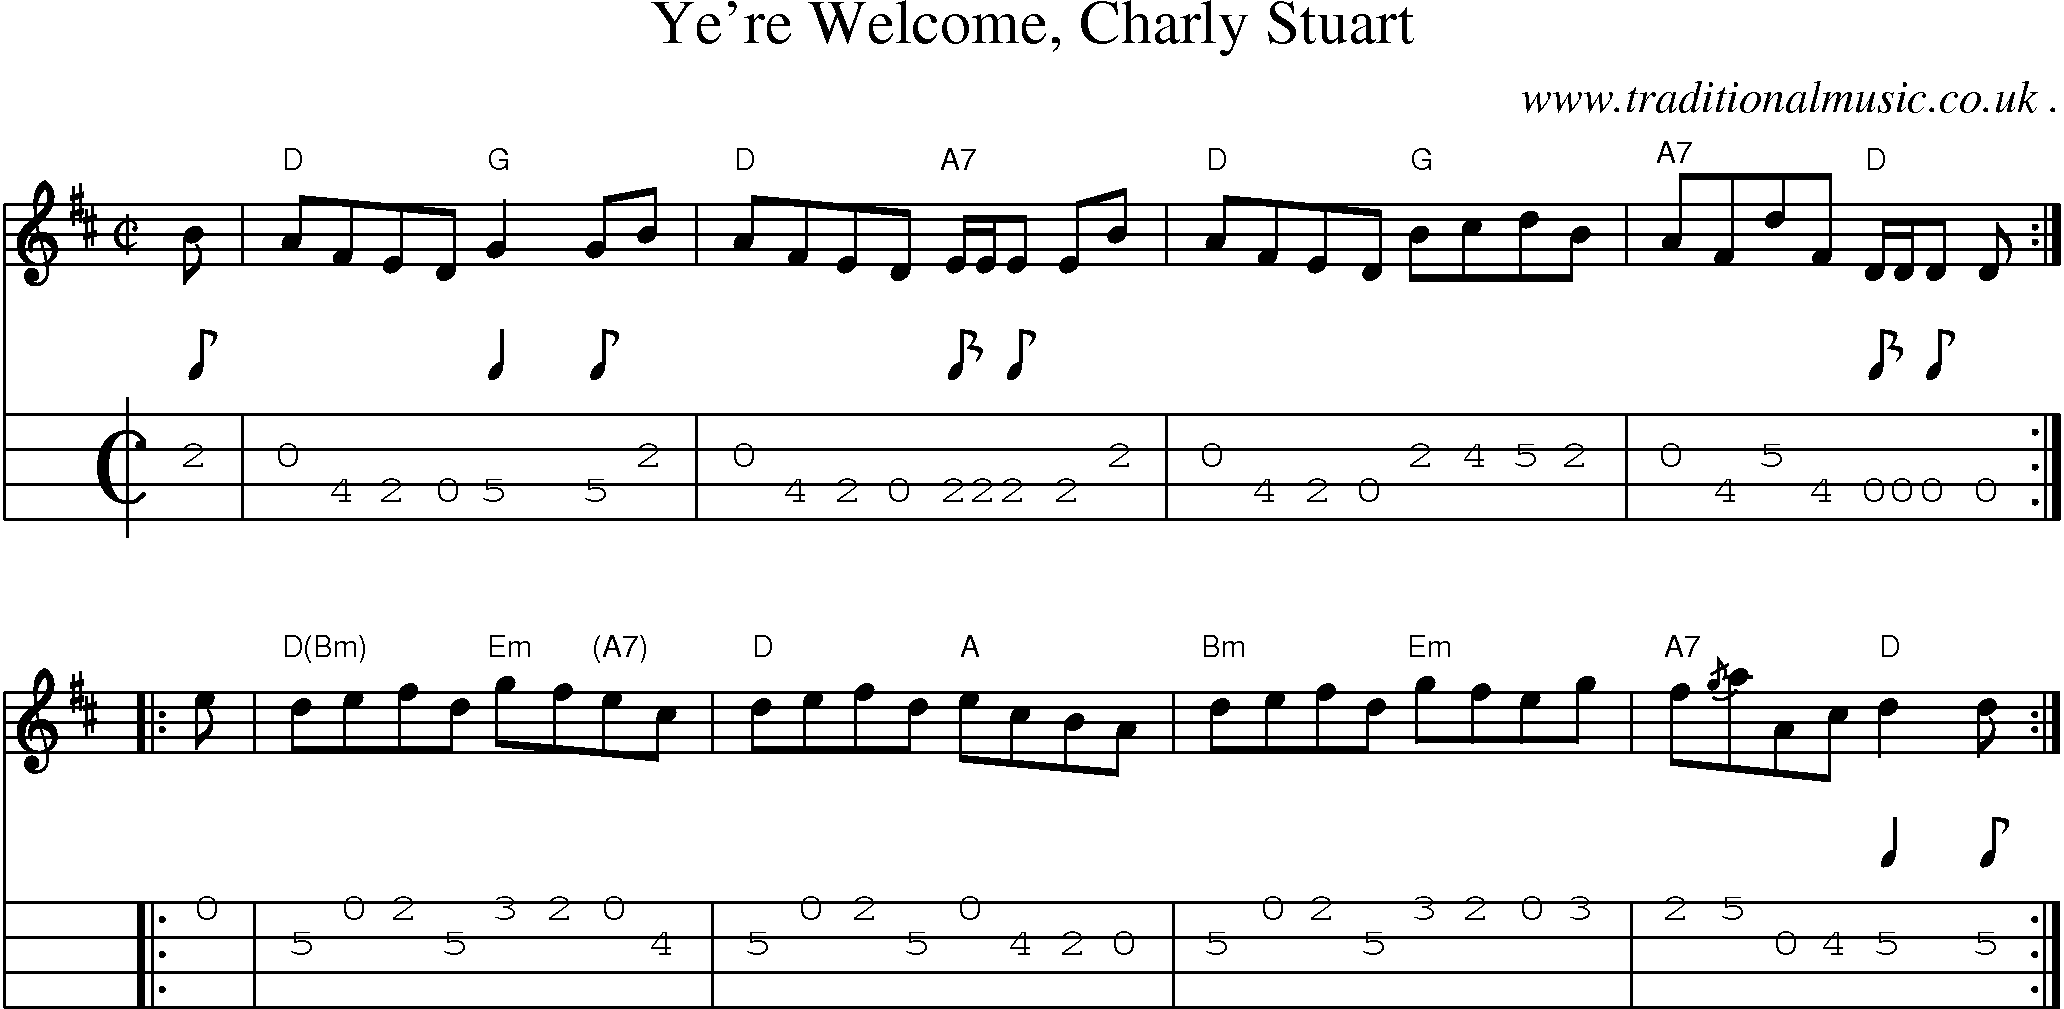 Sheet-music  score, Chords and Mandolin Tabs for Yere Welcome Charly Stuart